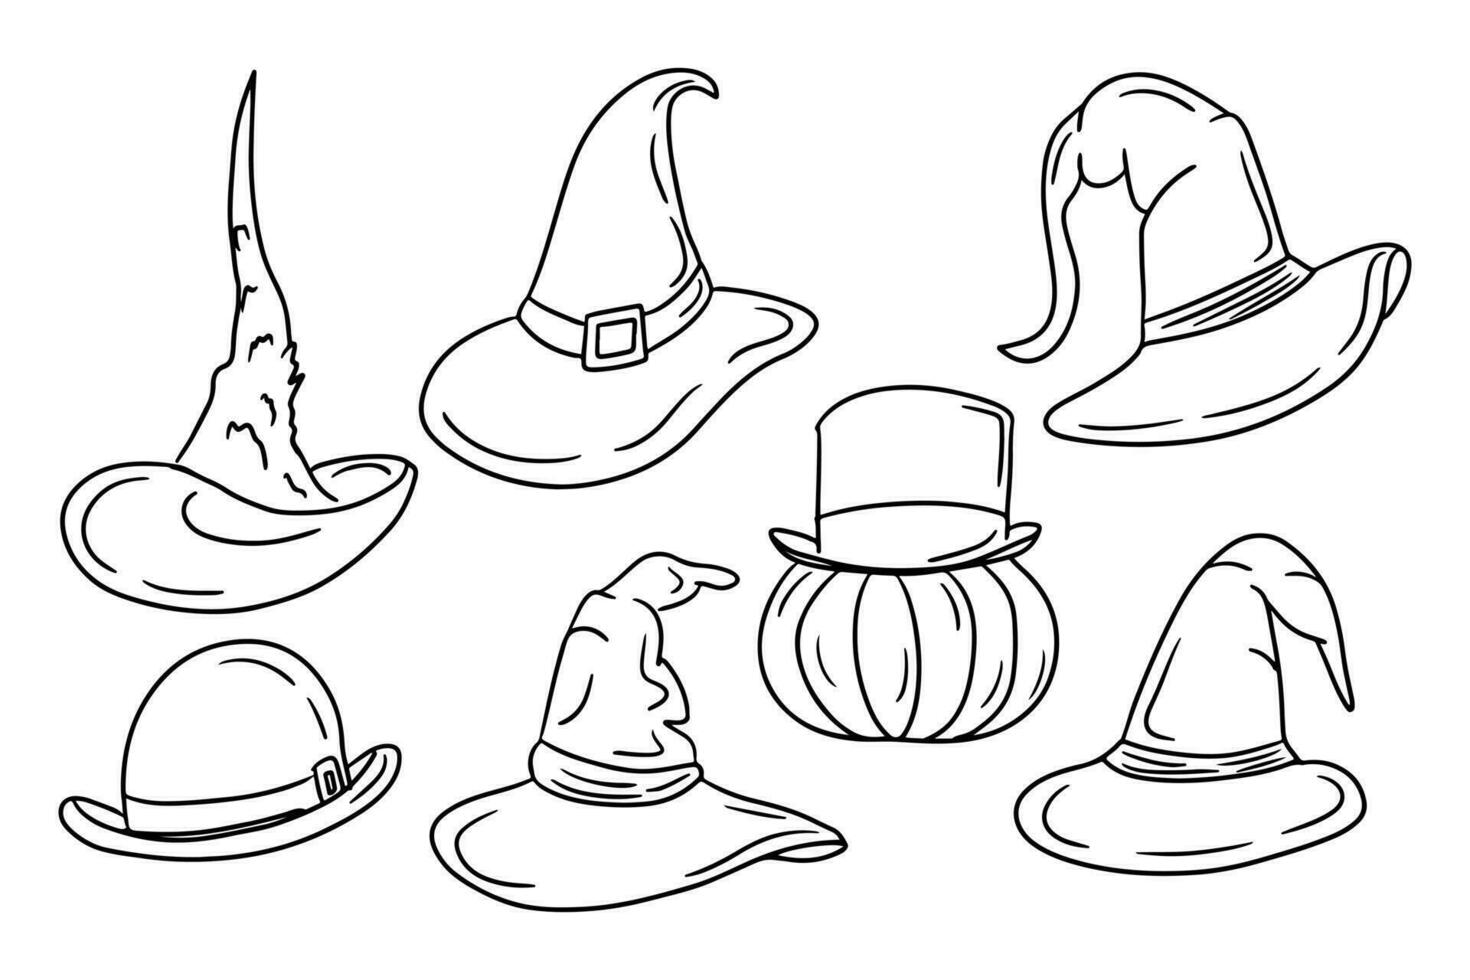 Doodle collection of hand drawn outline witch hats. Sketch design for Halloween. Black sketch simple elements on white background. Good for coloring pages, stickers, tatoo. vector